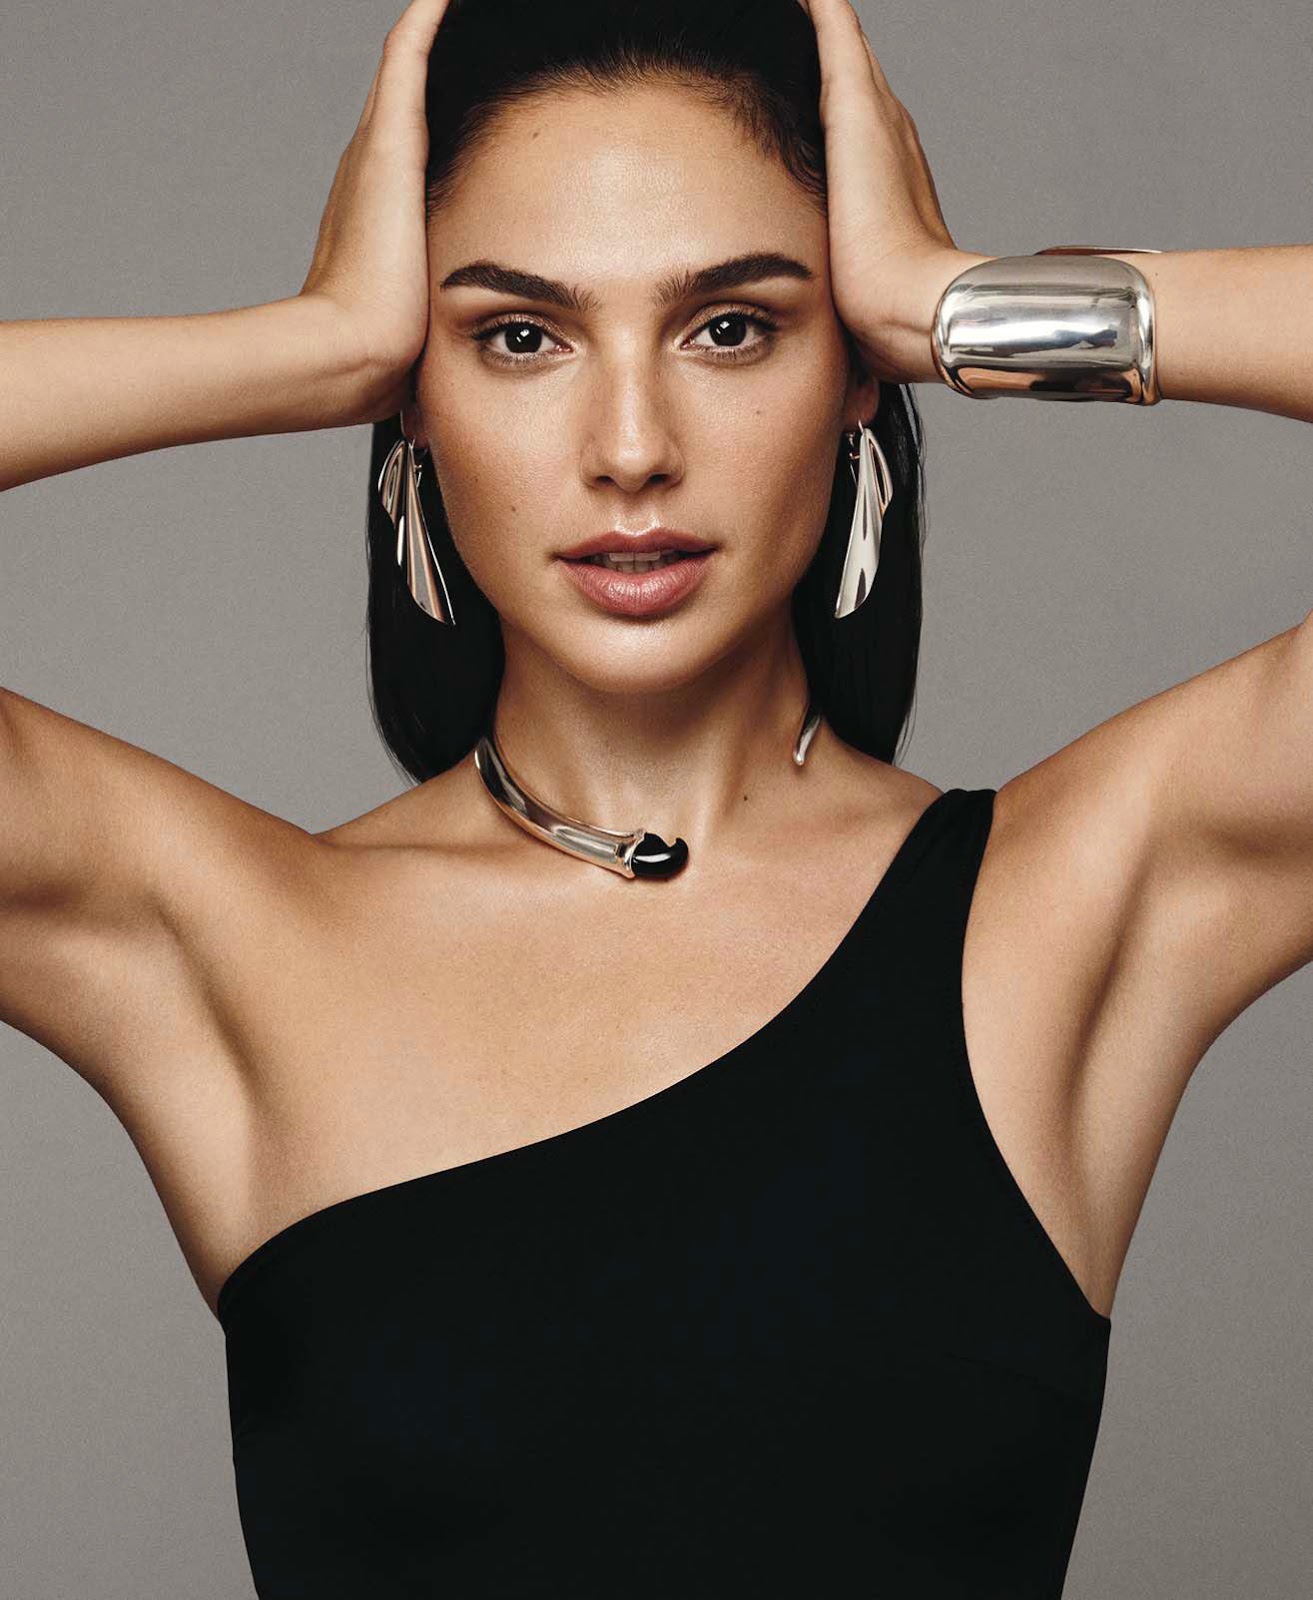 Popular actress welcomes baby no 3; interesting name and pic revealed ft Gal Gadot